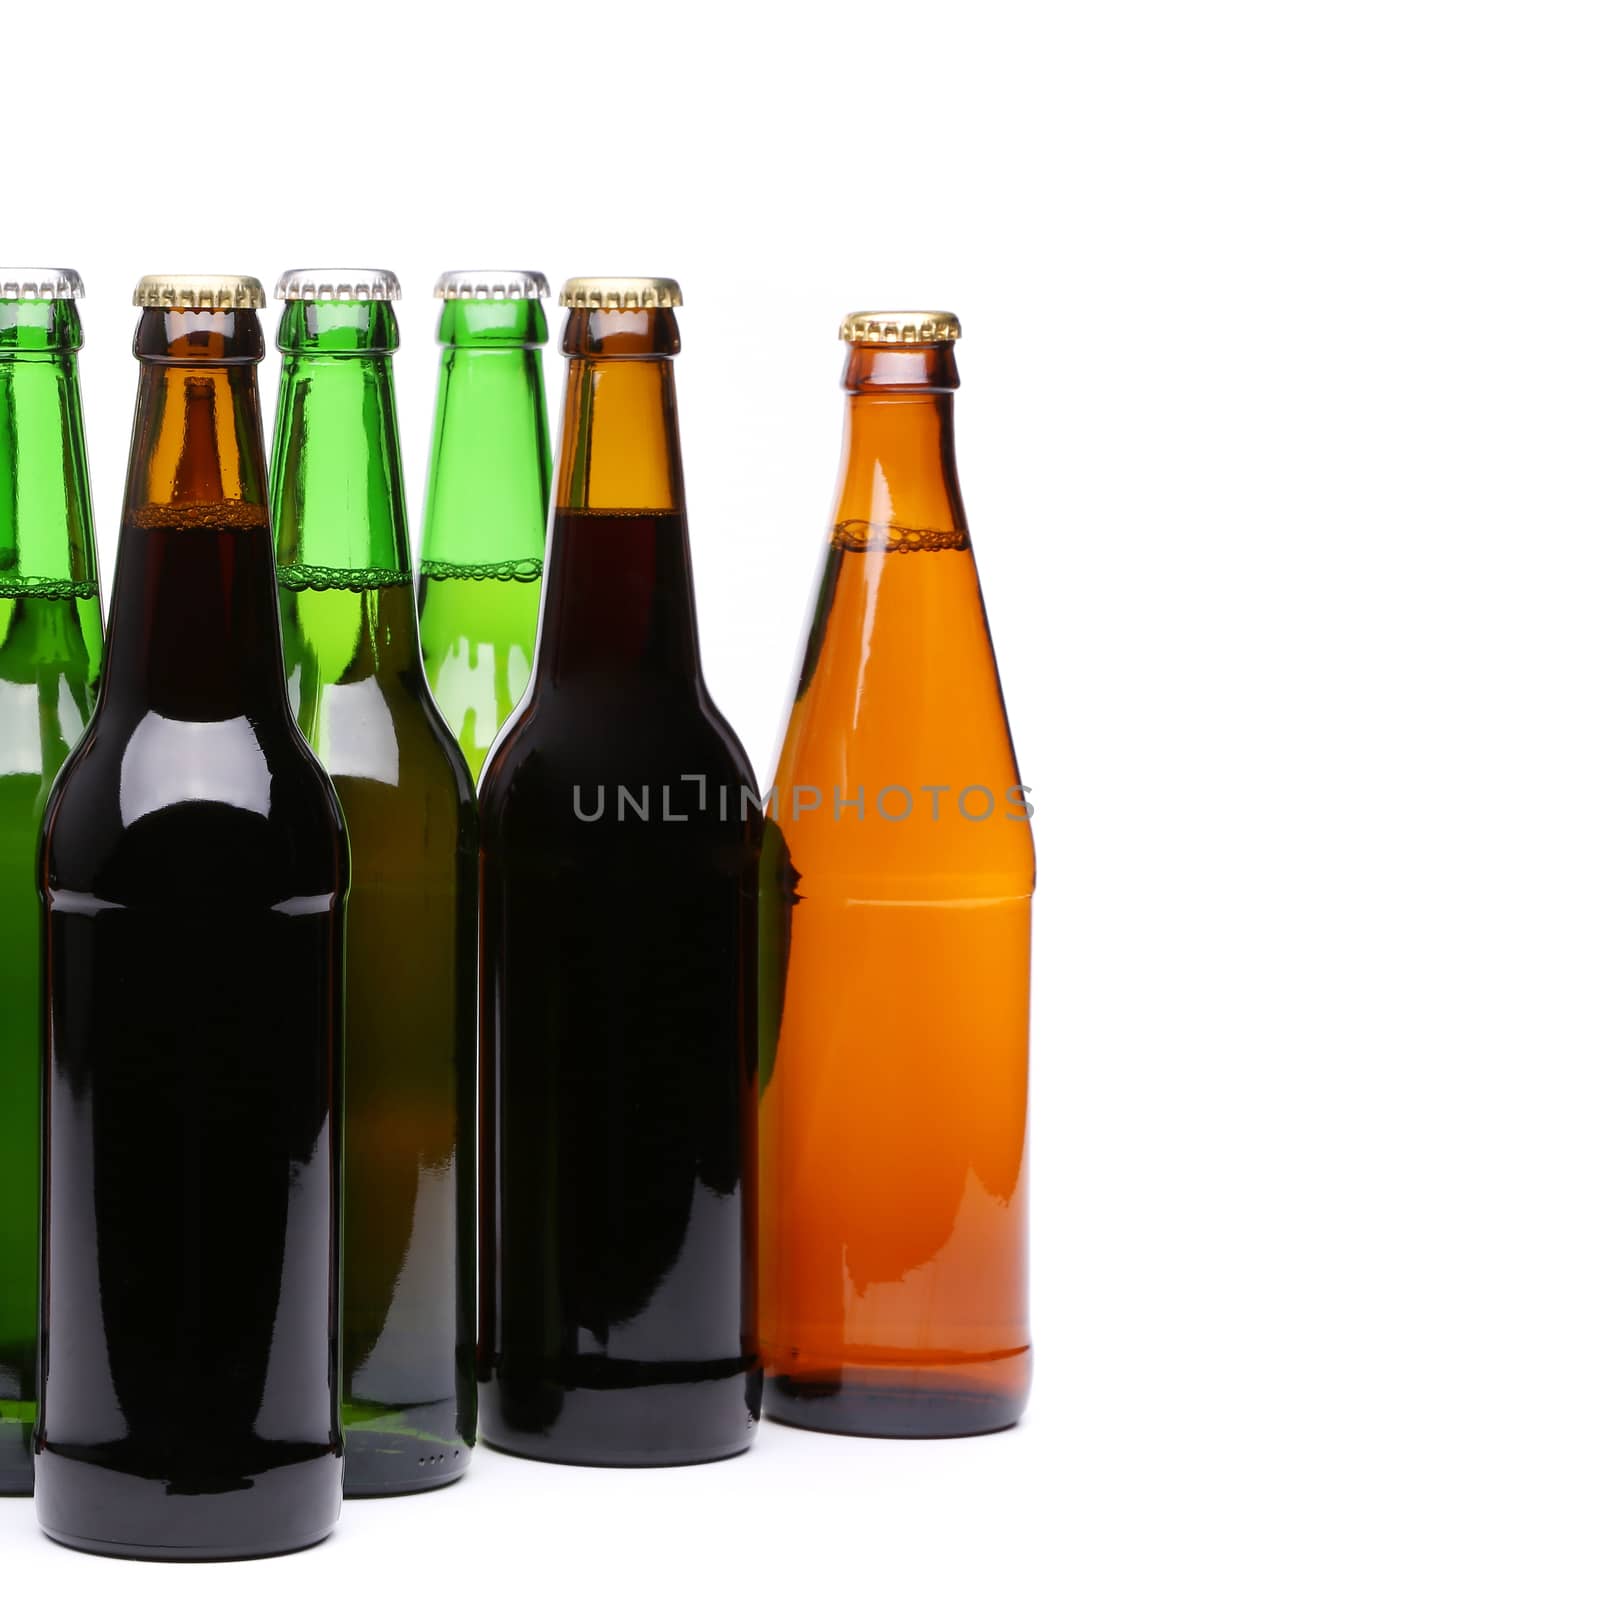 Closed bottles of beer on a white background by indigolotos